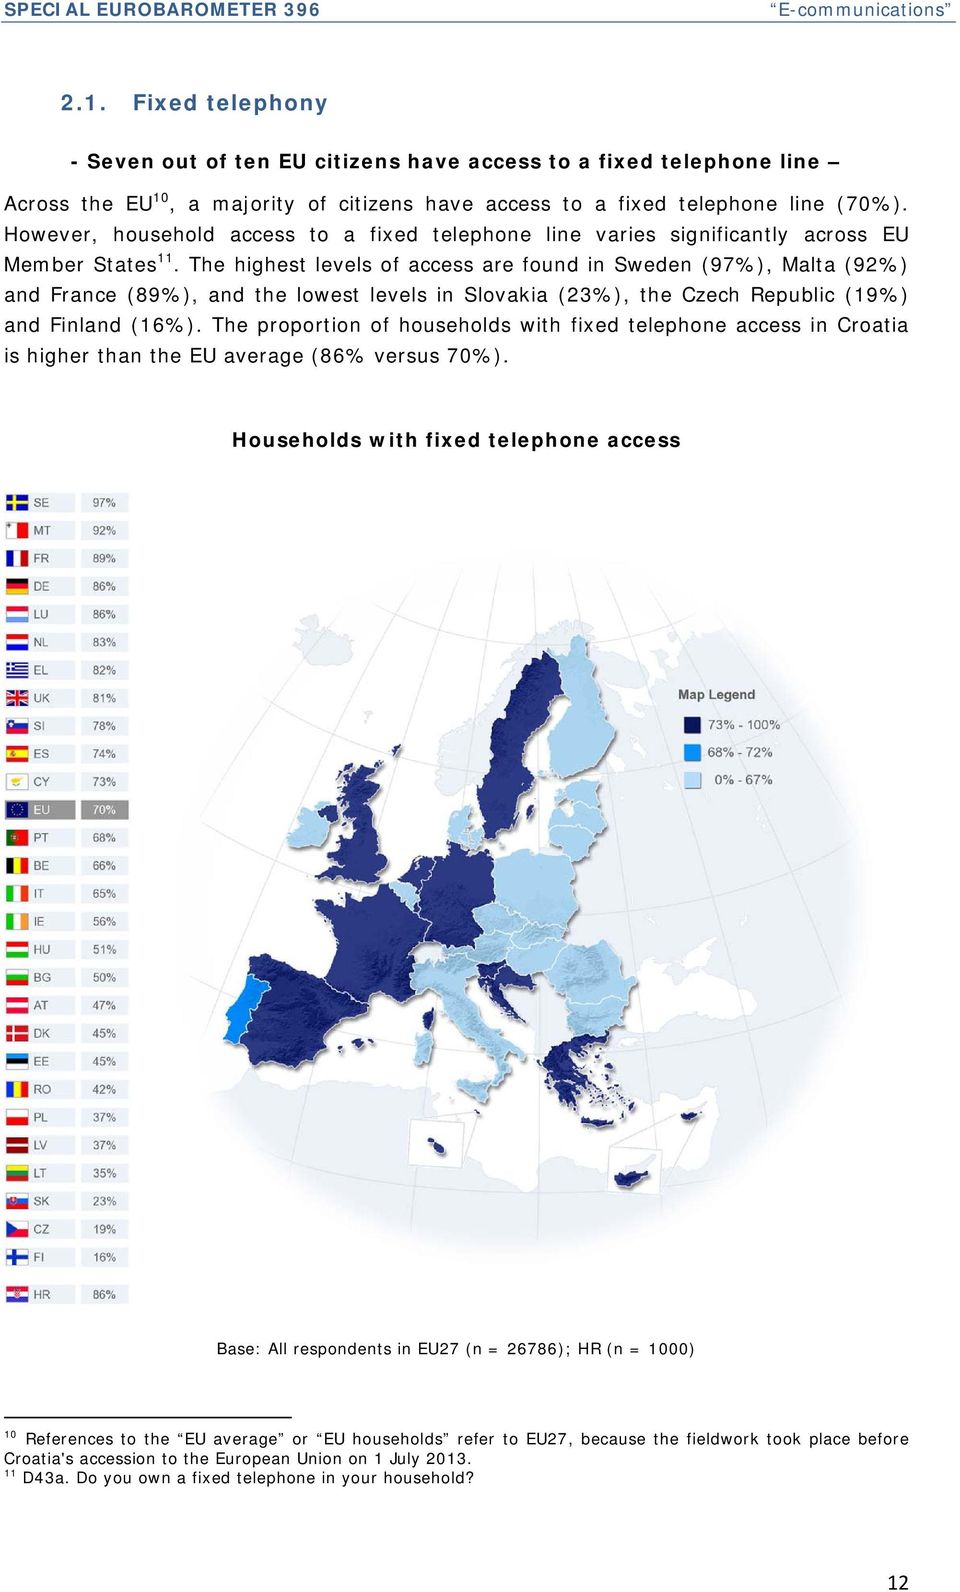 The highest levels of access are found in Sweden (97%), Malta (92%) and France (89%), and the lowest levels in Slovakia (23%), the Czech Republic (19%) and Finland (16%).